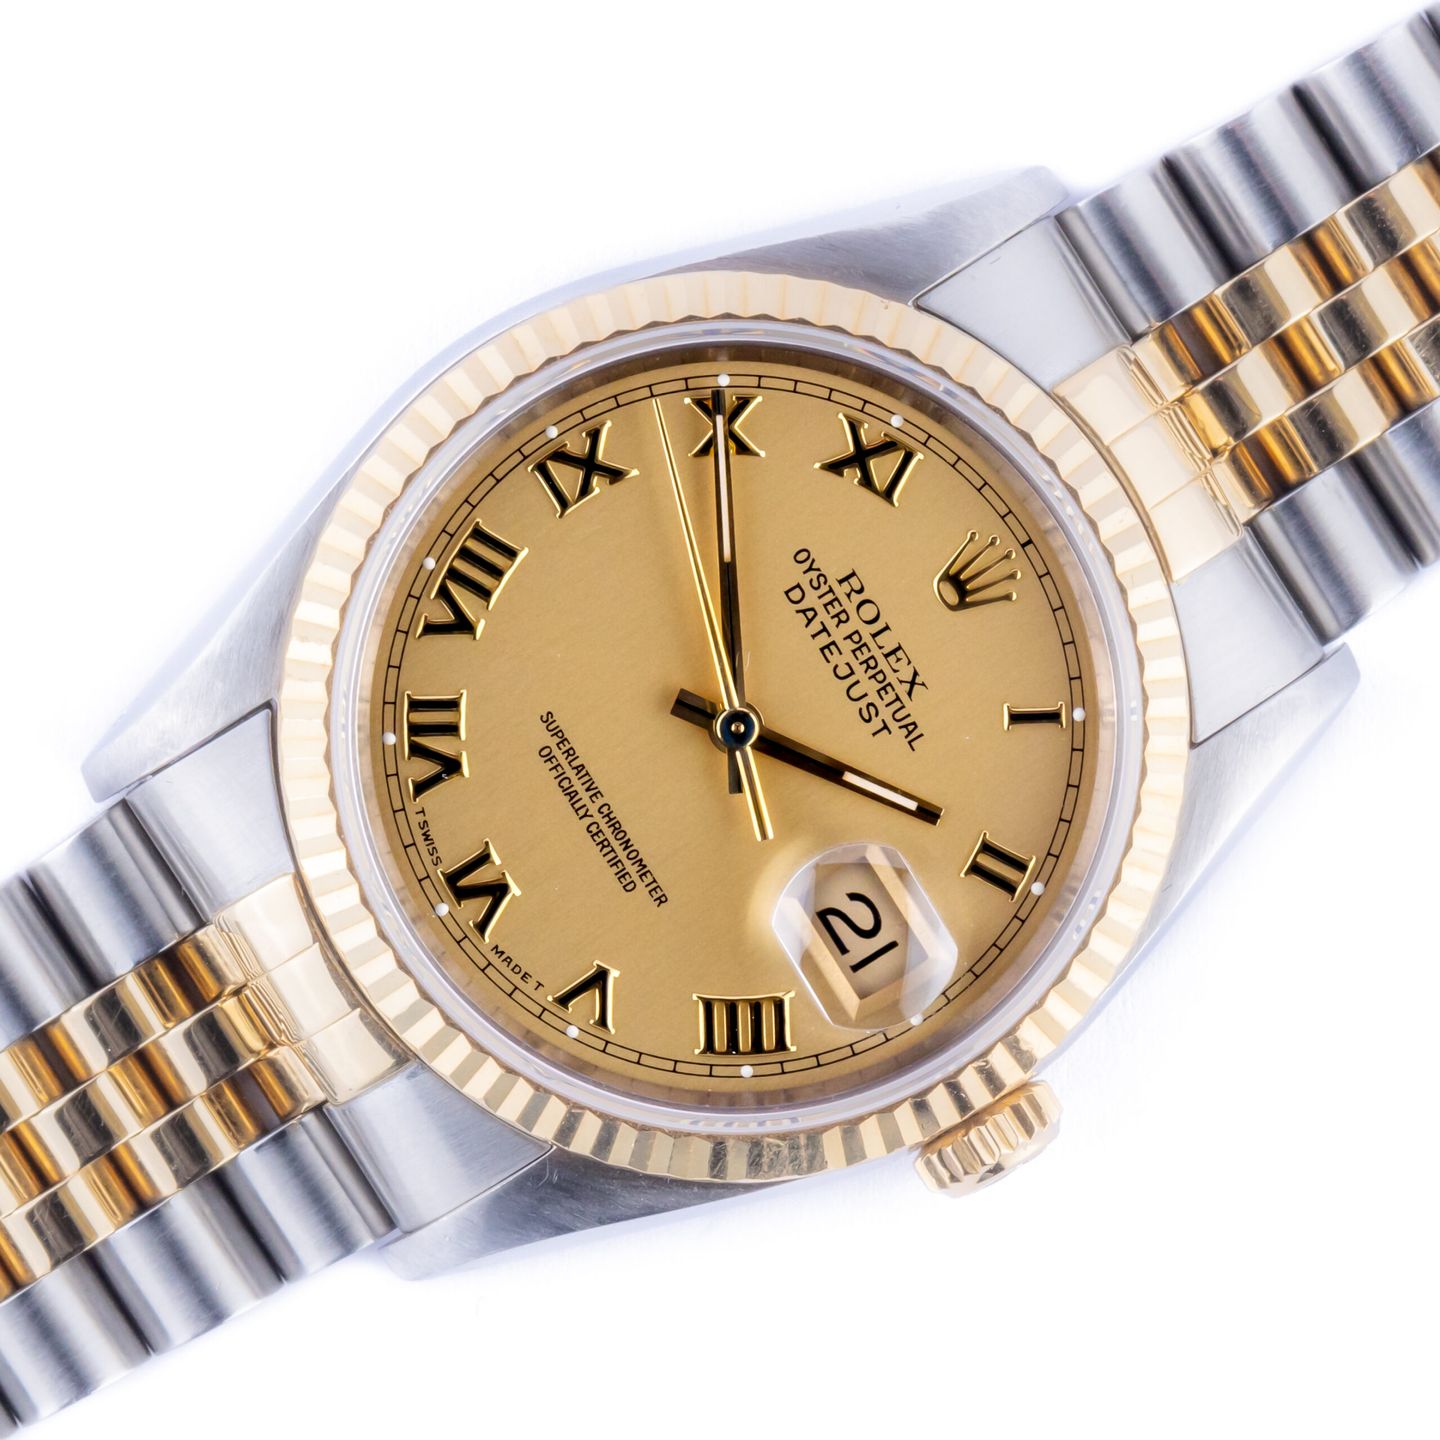 Rolex Datejust 36 16233 (1991) - Champagne dial 36 mm Gold/Steel case (1/7)